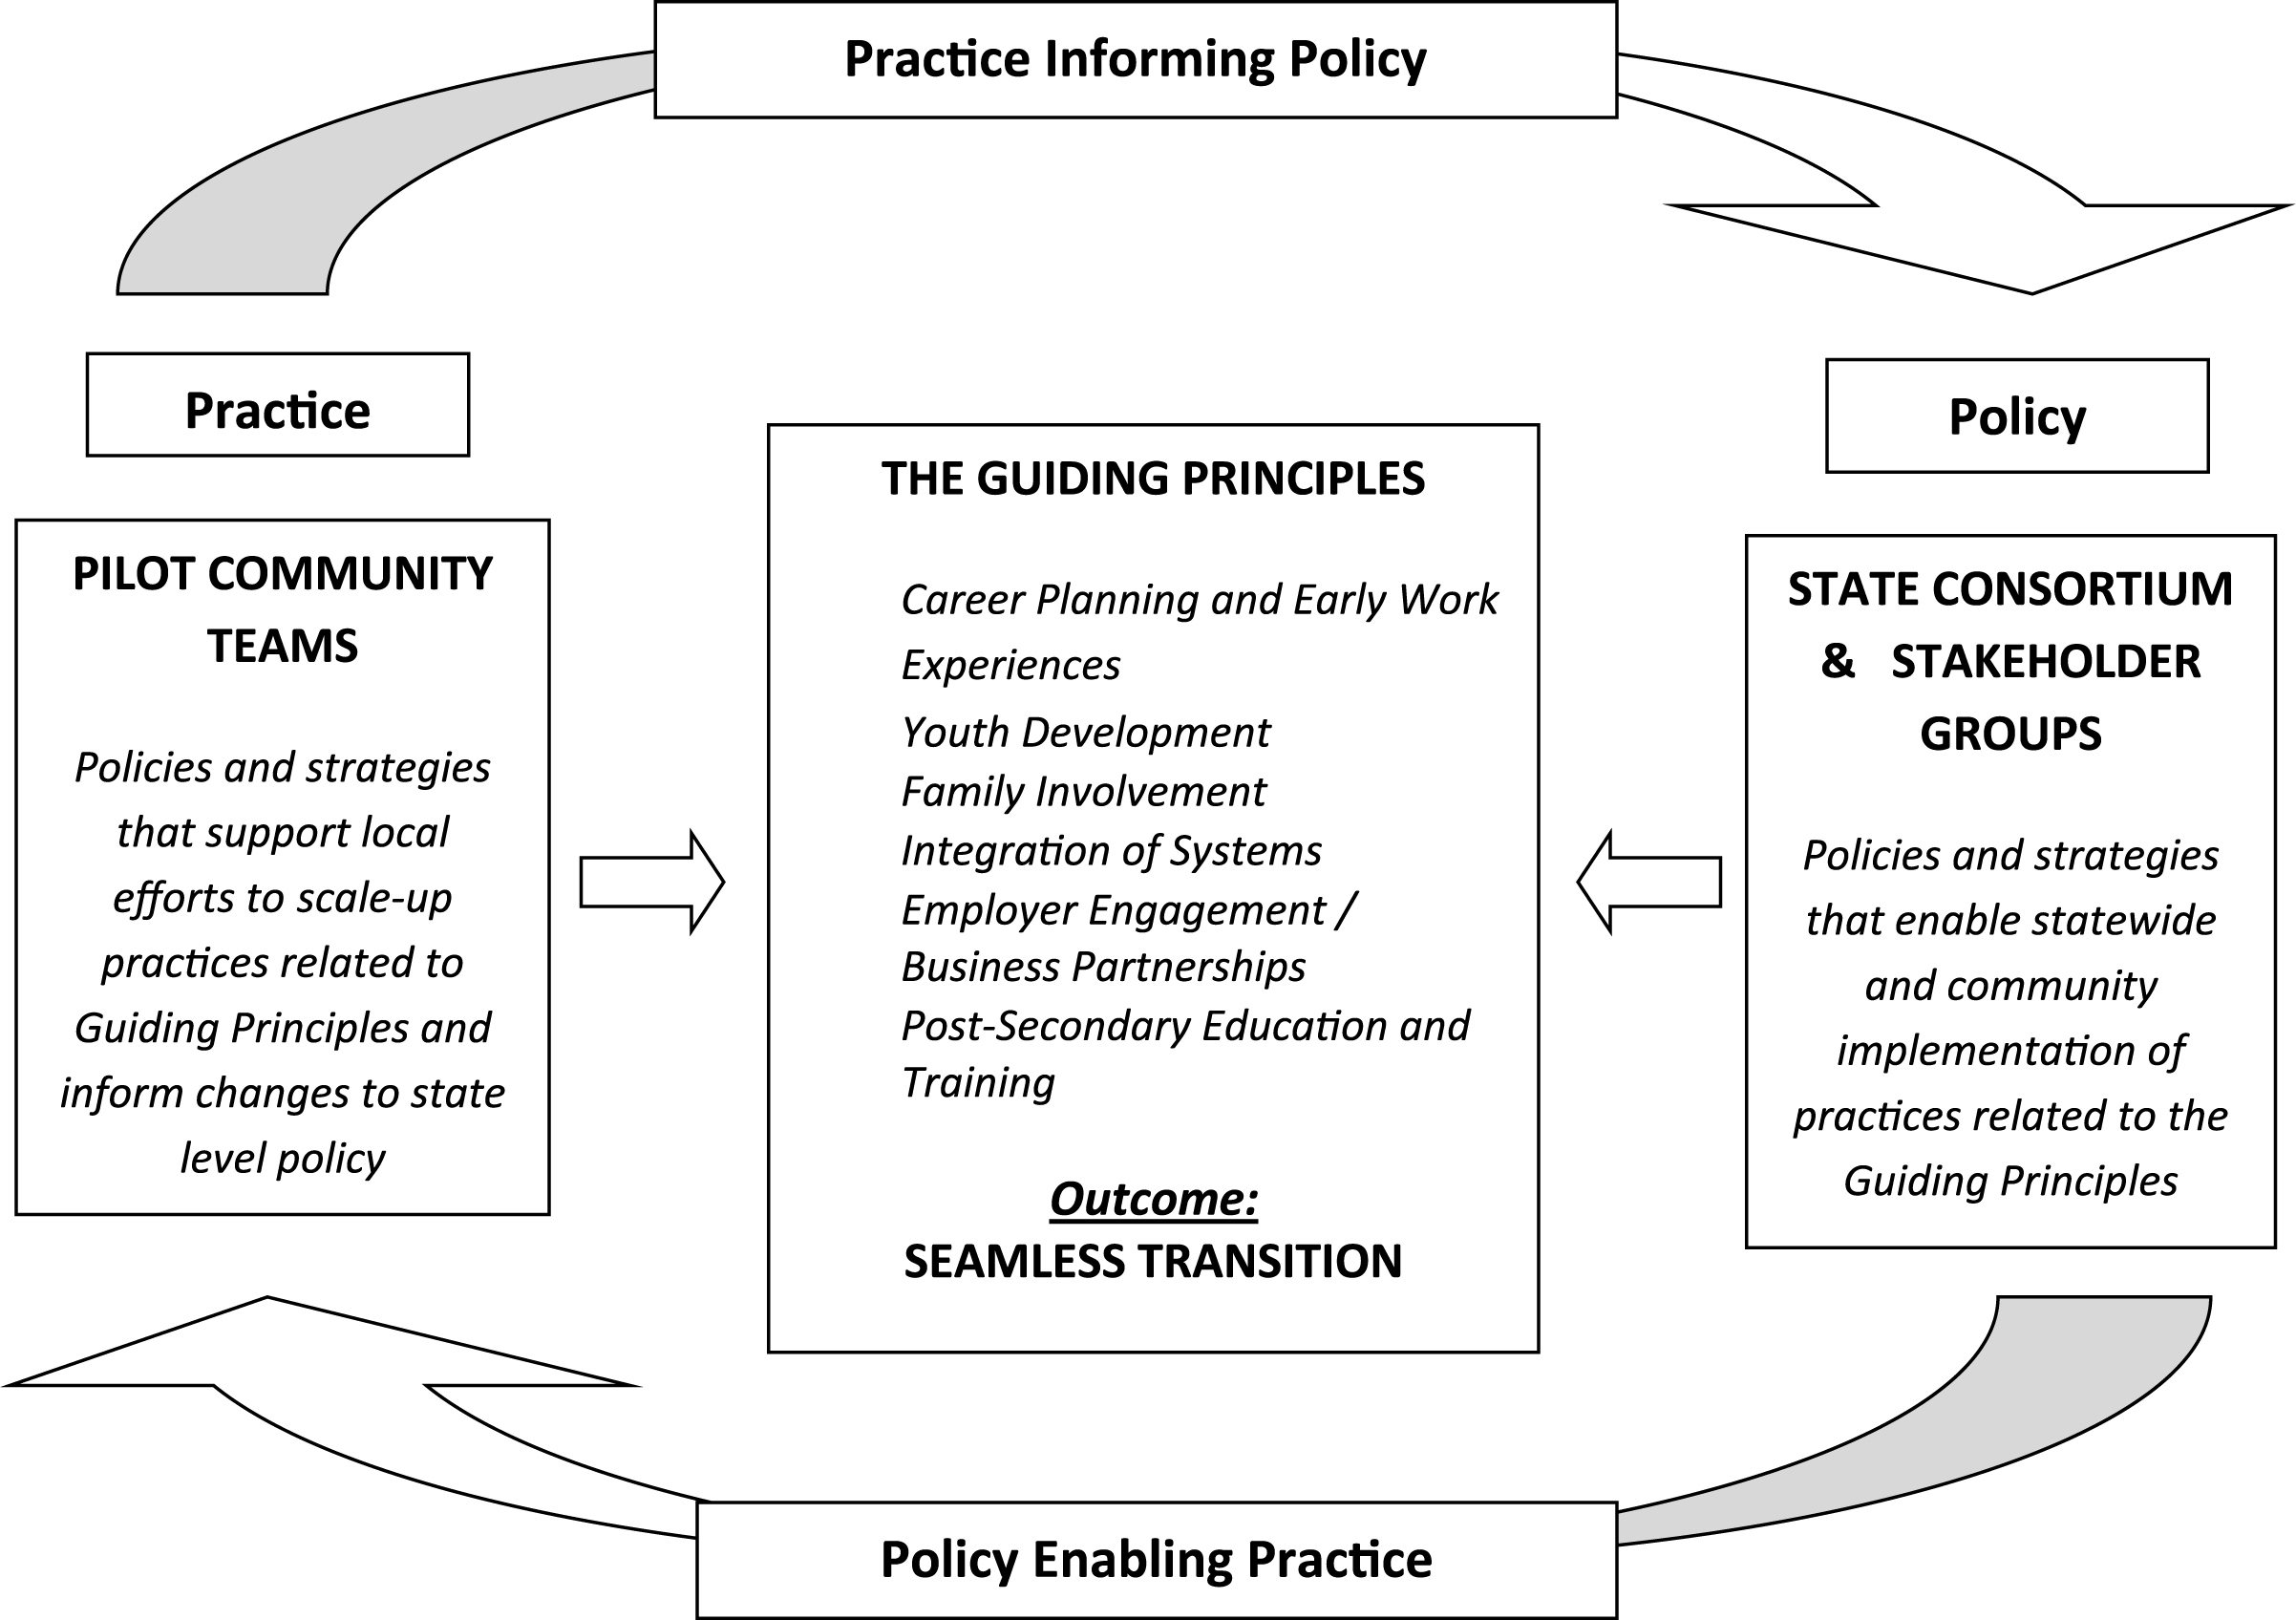 Policy-Enables-Practice/Practice-Informs-Policy Framework.